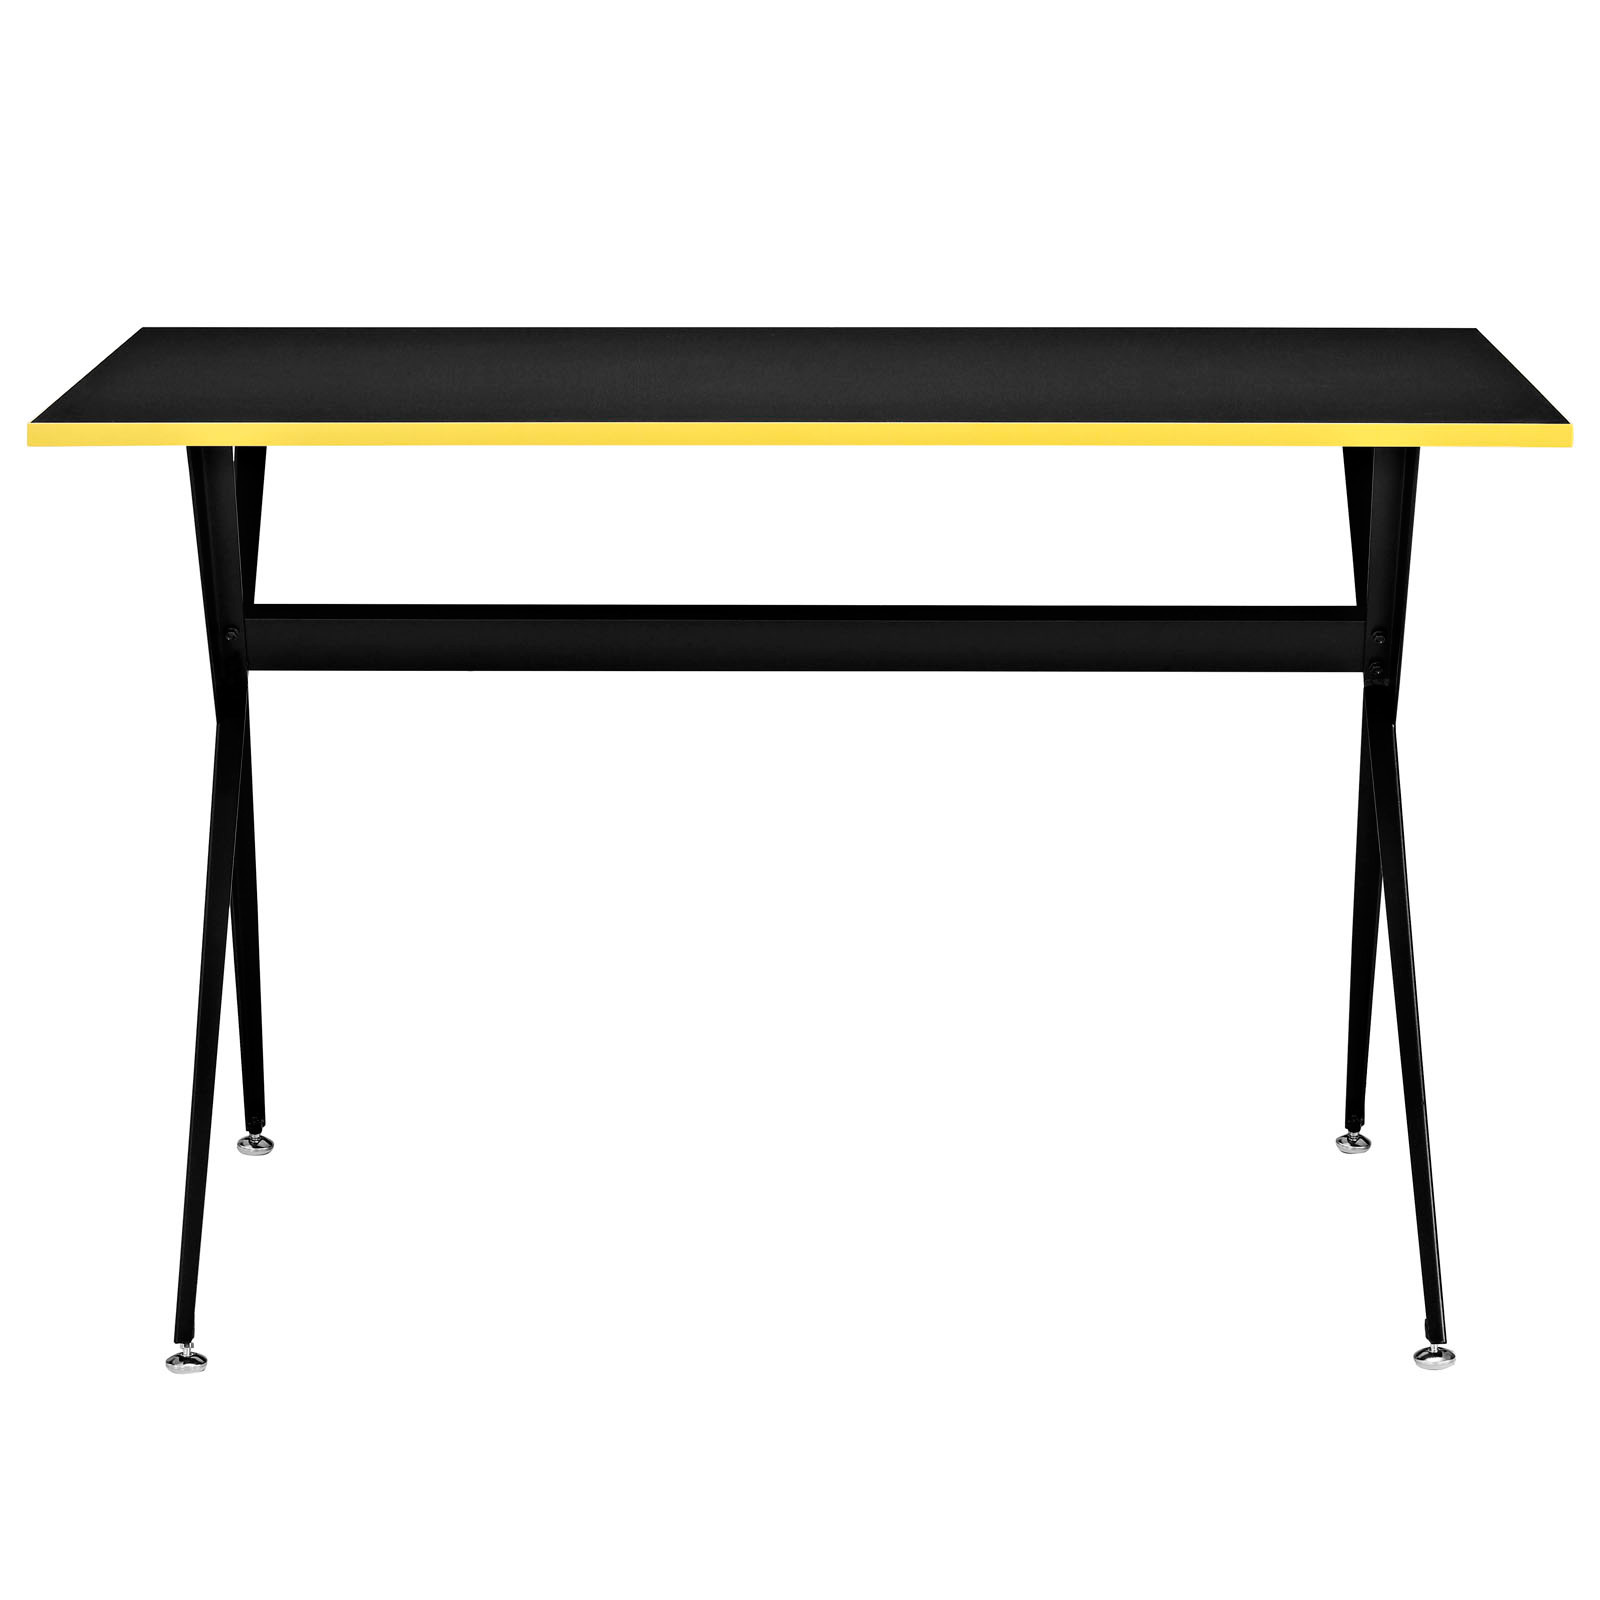 Space saving desk from Modway - Front View - Shown in Black